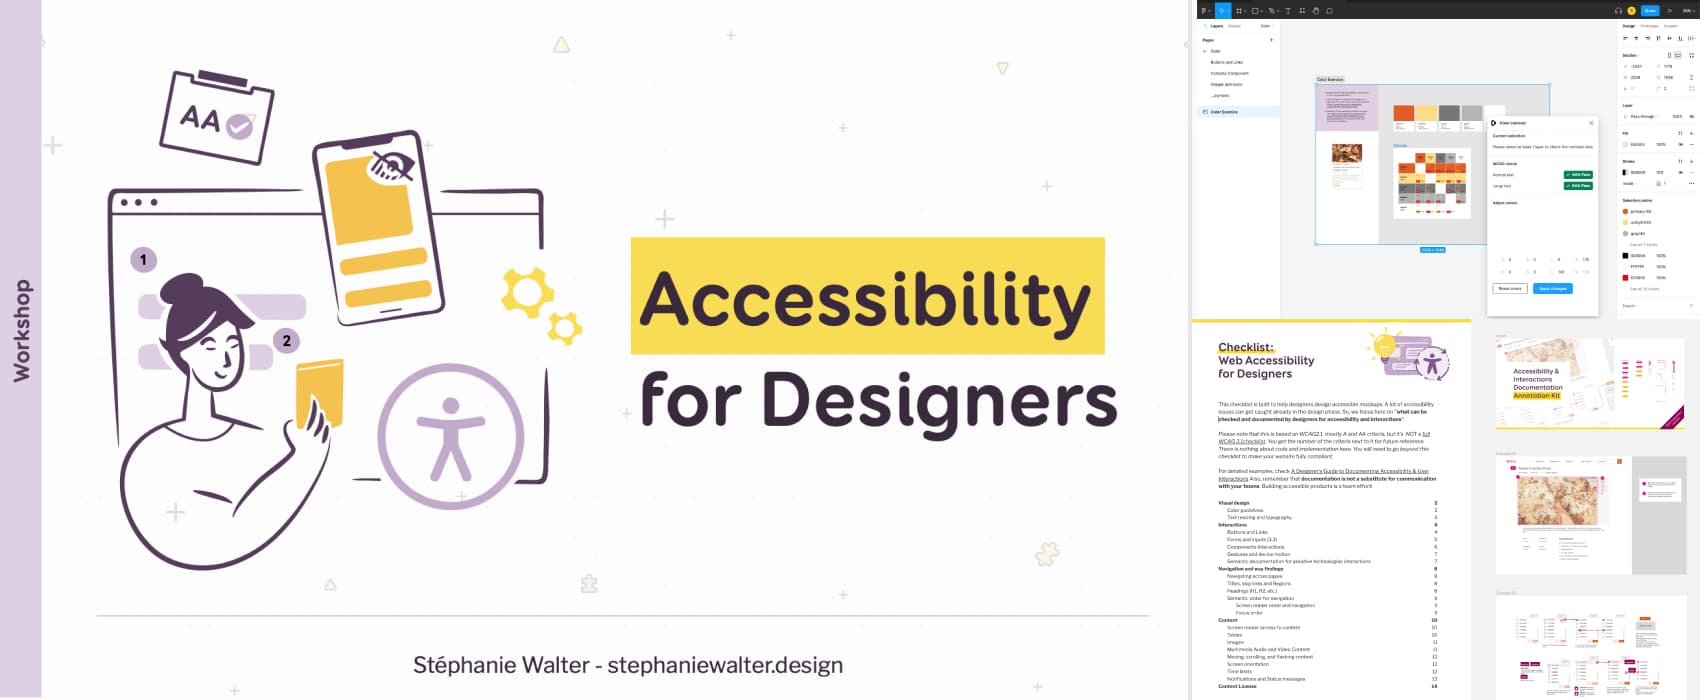 Accessibility for Designers